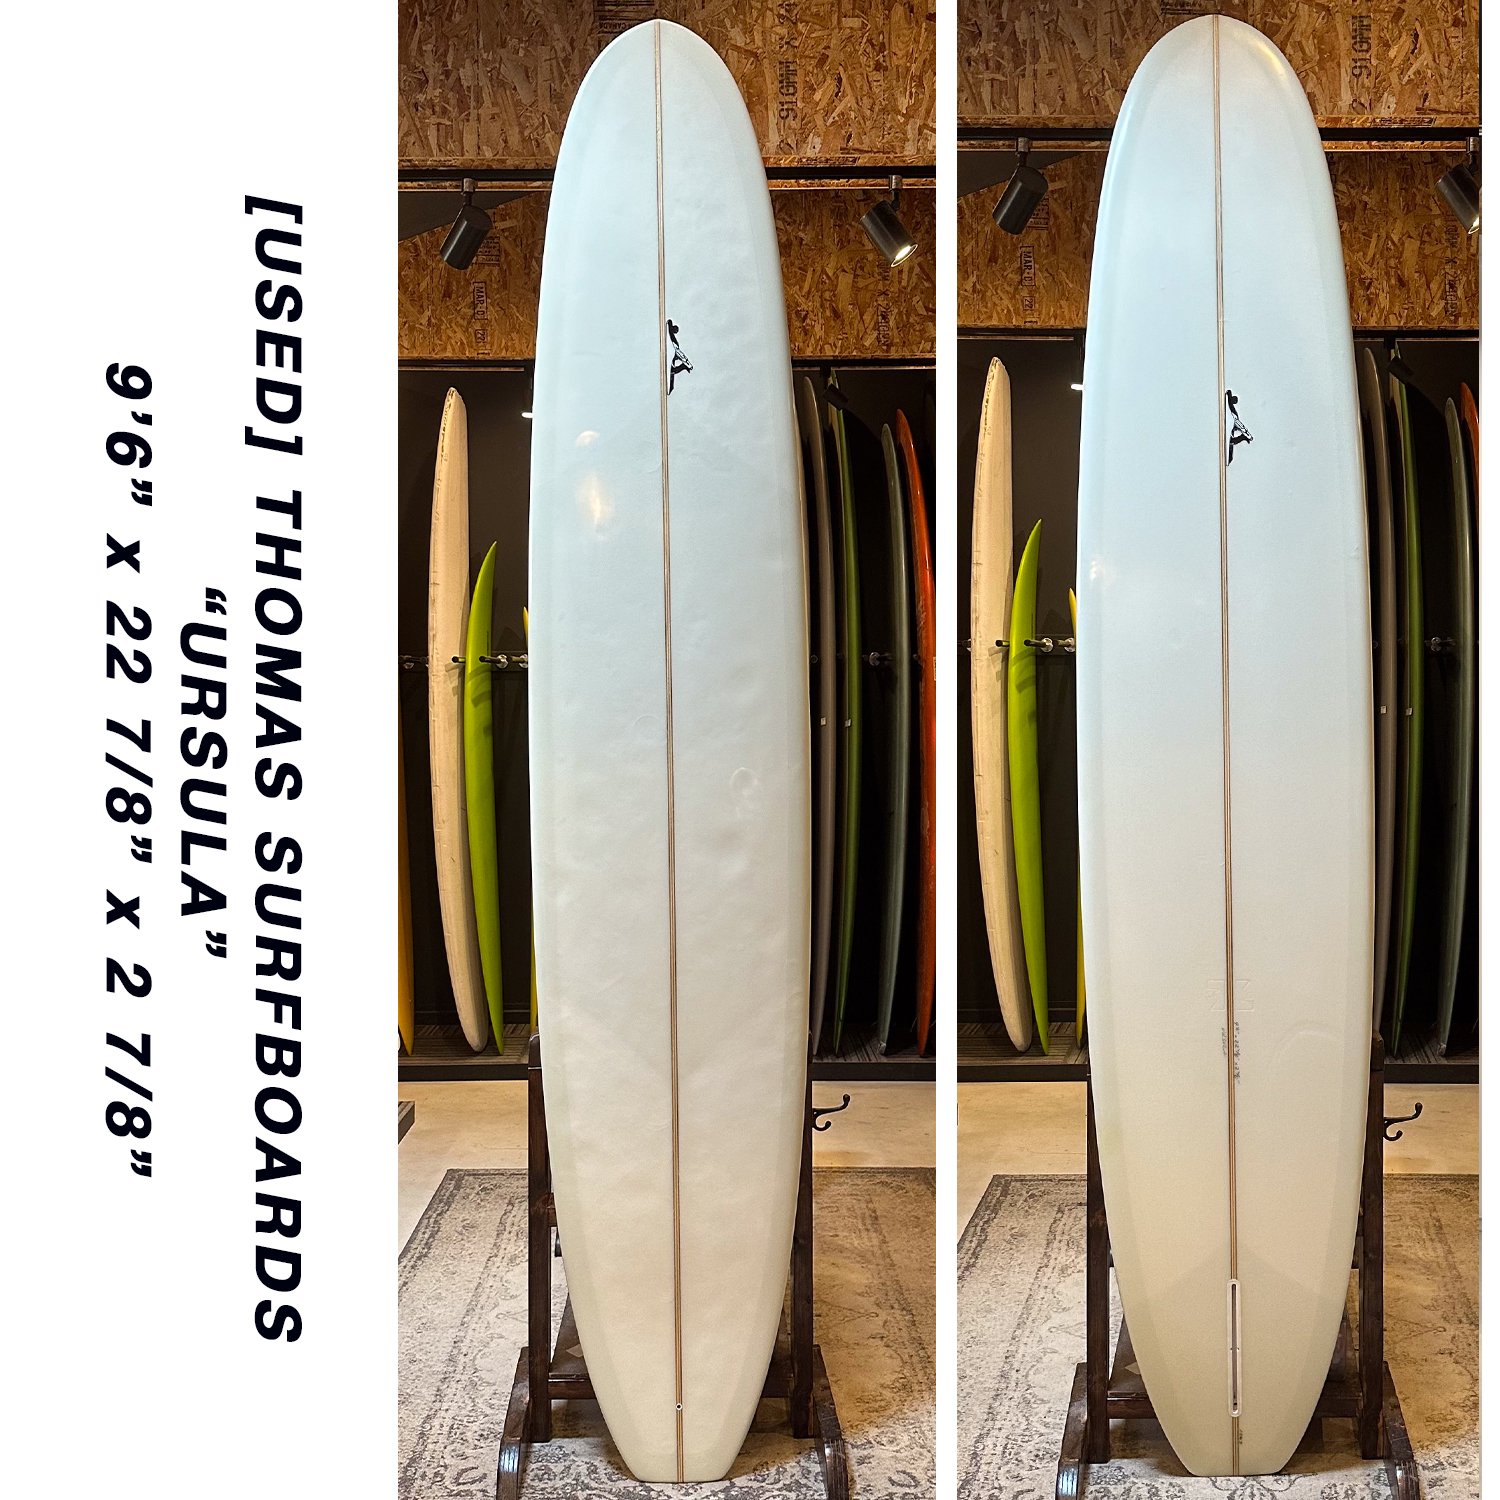 <img class='new_mark_img1' src='https://img.shop-pro.jp/img/new/icons25.gif' style='border:none;display:inline;margin:0px;padding:0px;width:auto;' />USED BOARDThomas surfboards URSULA 9'6" ()